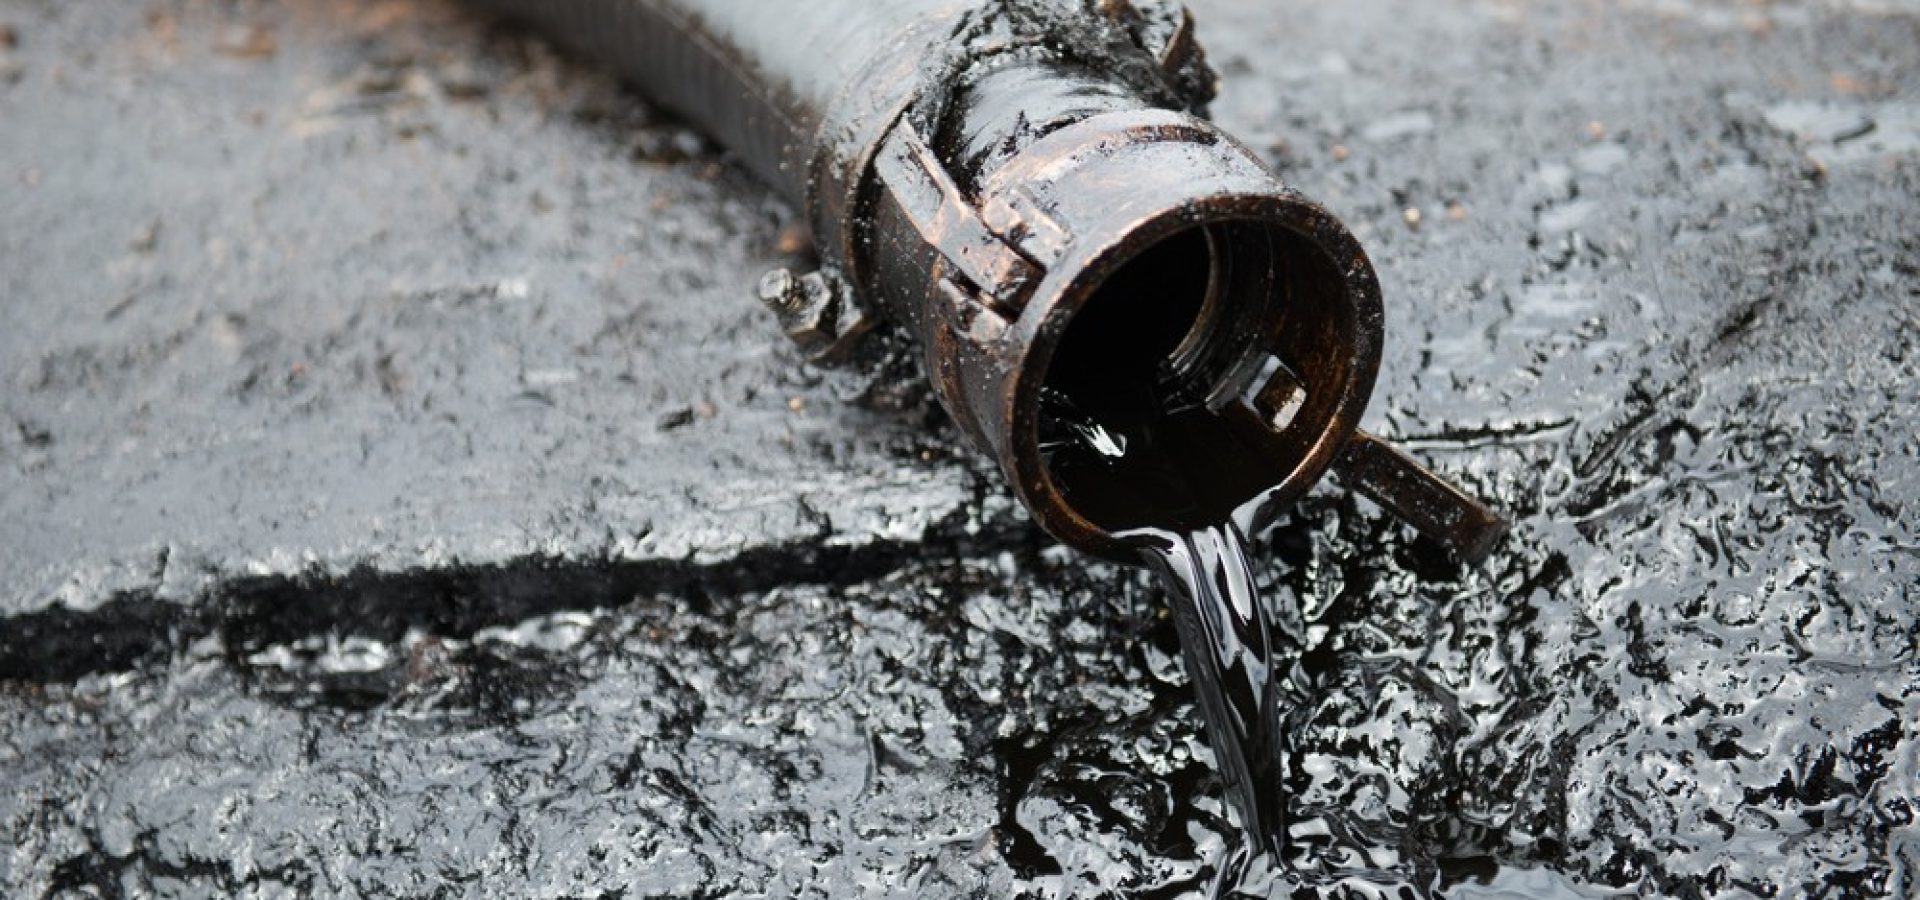 Wibest – Shale: Crude oil coming out from a pipe.